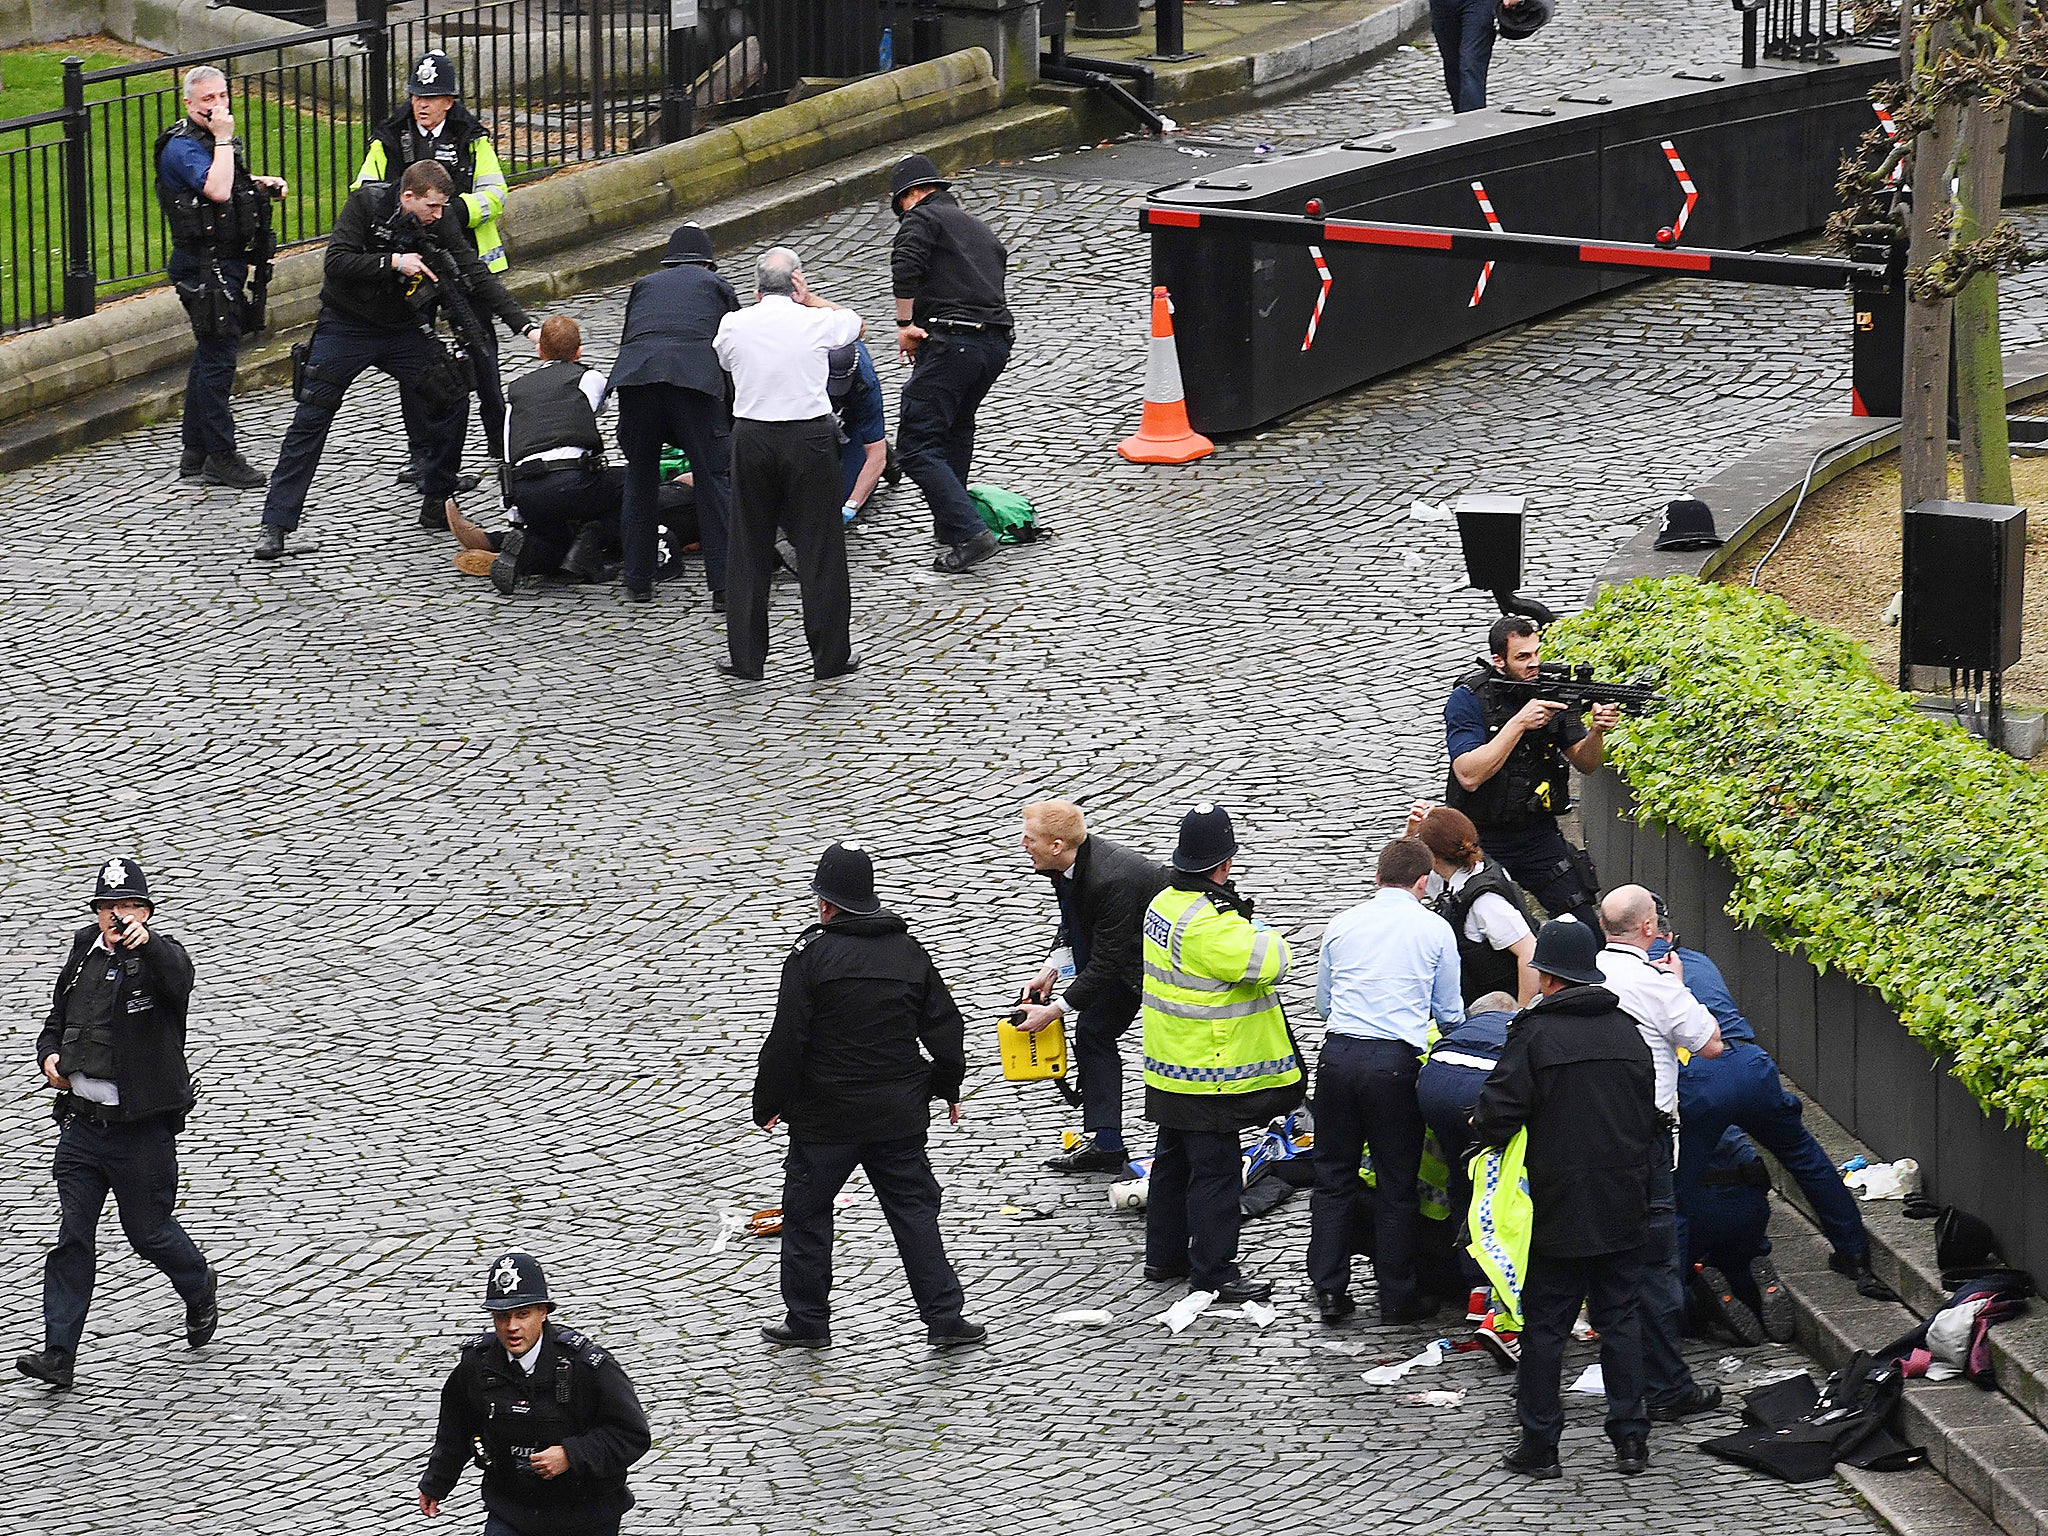 A policeman points a gun at a man on the floor (top) while emergency services attend him and a police officer (bottom) outside the Palace of Westminster, London, after policeman was stabbed and his apparent attacker shot by officers in a major security incident at the Houses of Parliament